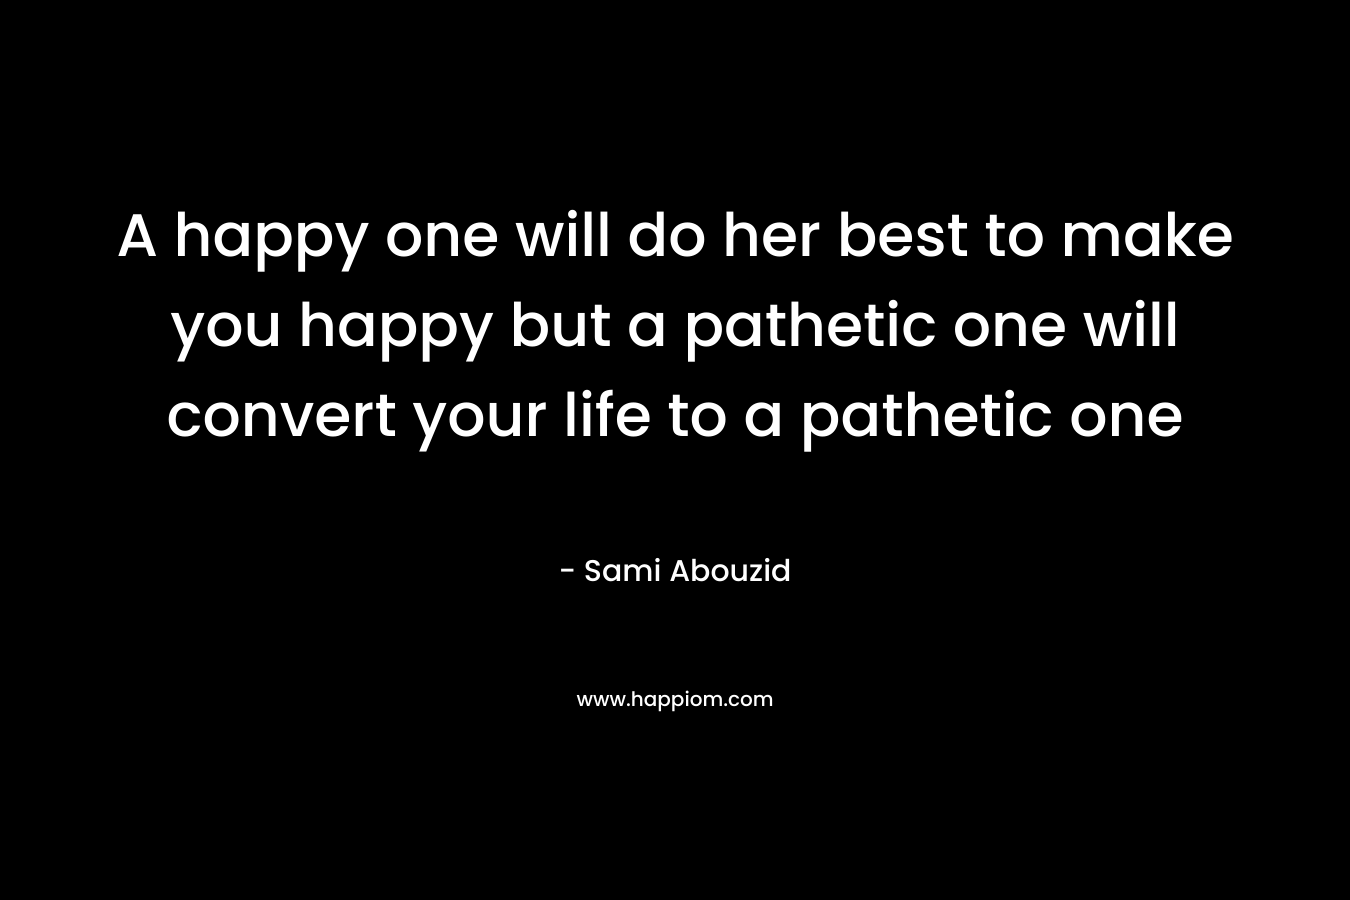 A happy one will do her best to make you happy but a pathetic one will convert your life to a pathetic one